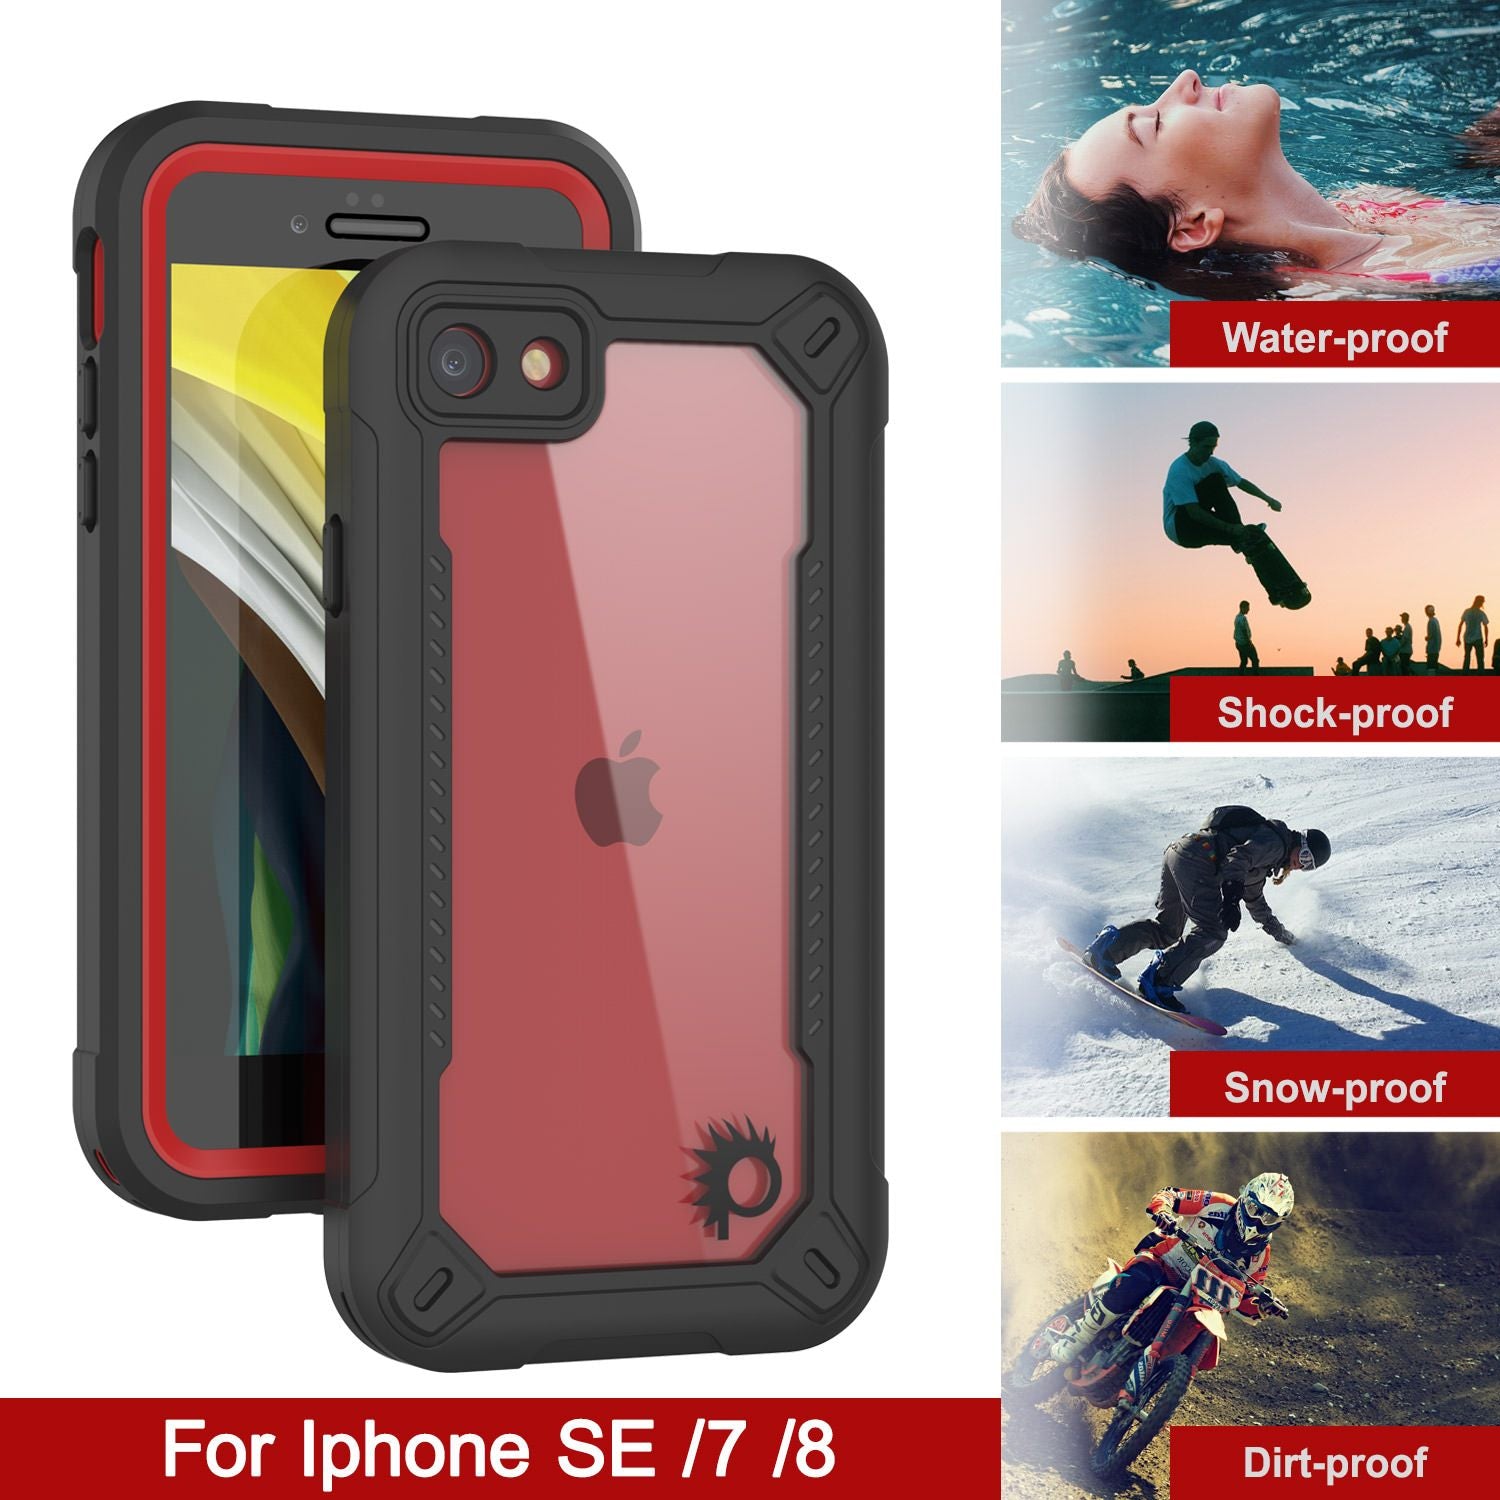 iPhone 8 Waterproof IP68 Case, Punkcase [red]  [Maximus Series] [Slim Fit] [IP68 Certified] [Shockresistant] Clear Armor Cover with Screen Protector | Ultimate Protection